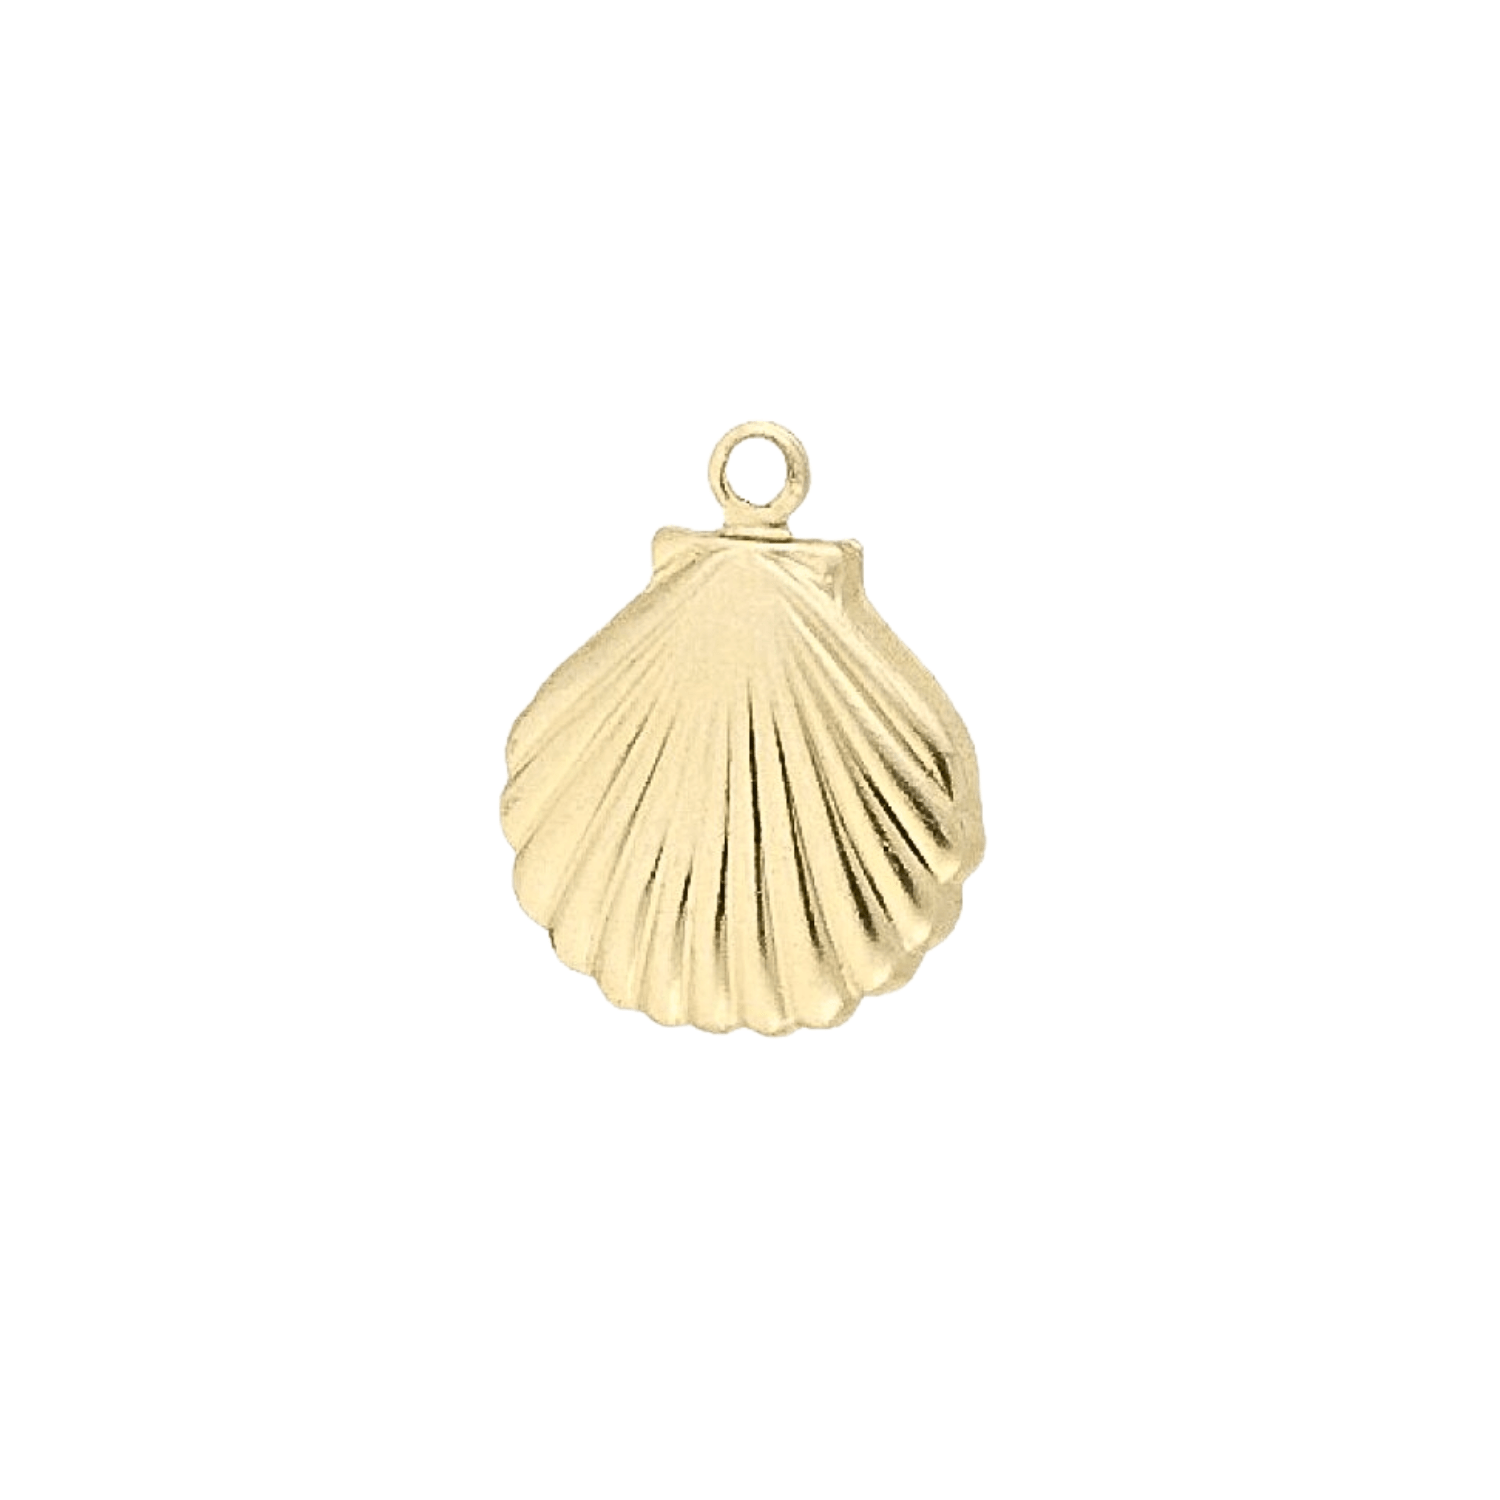 Shell Charm - 14k Gold Filled